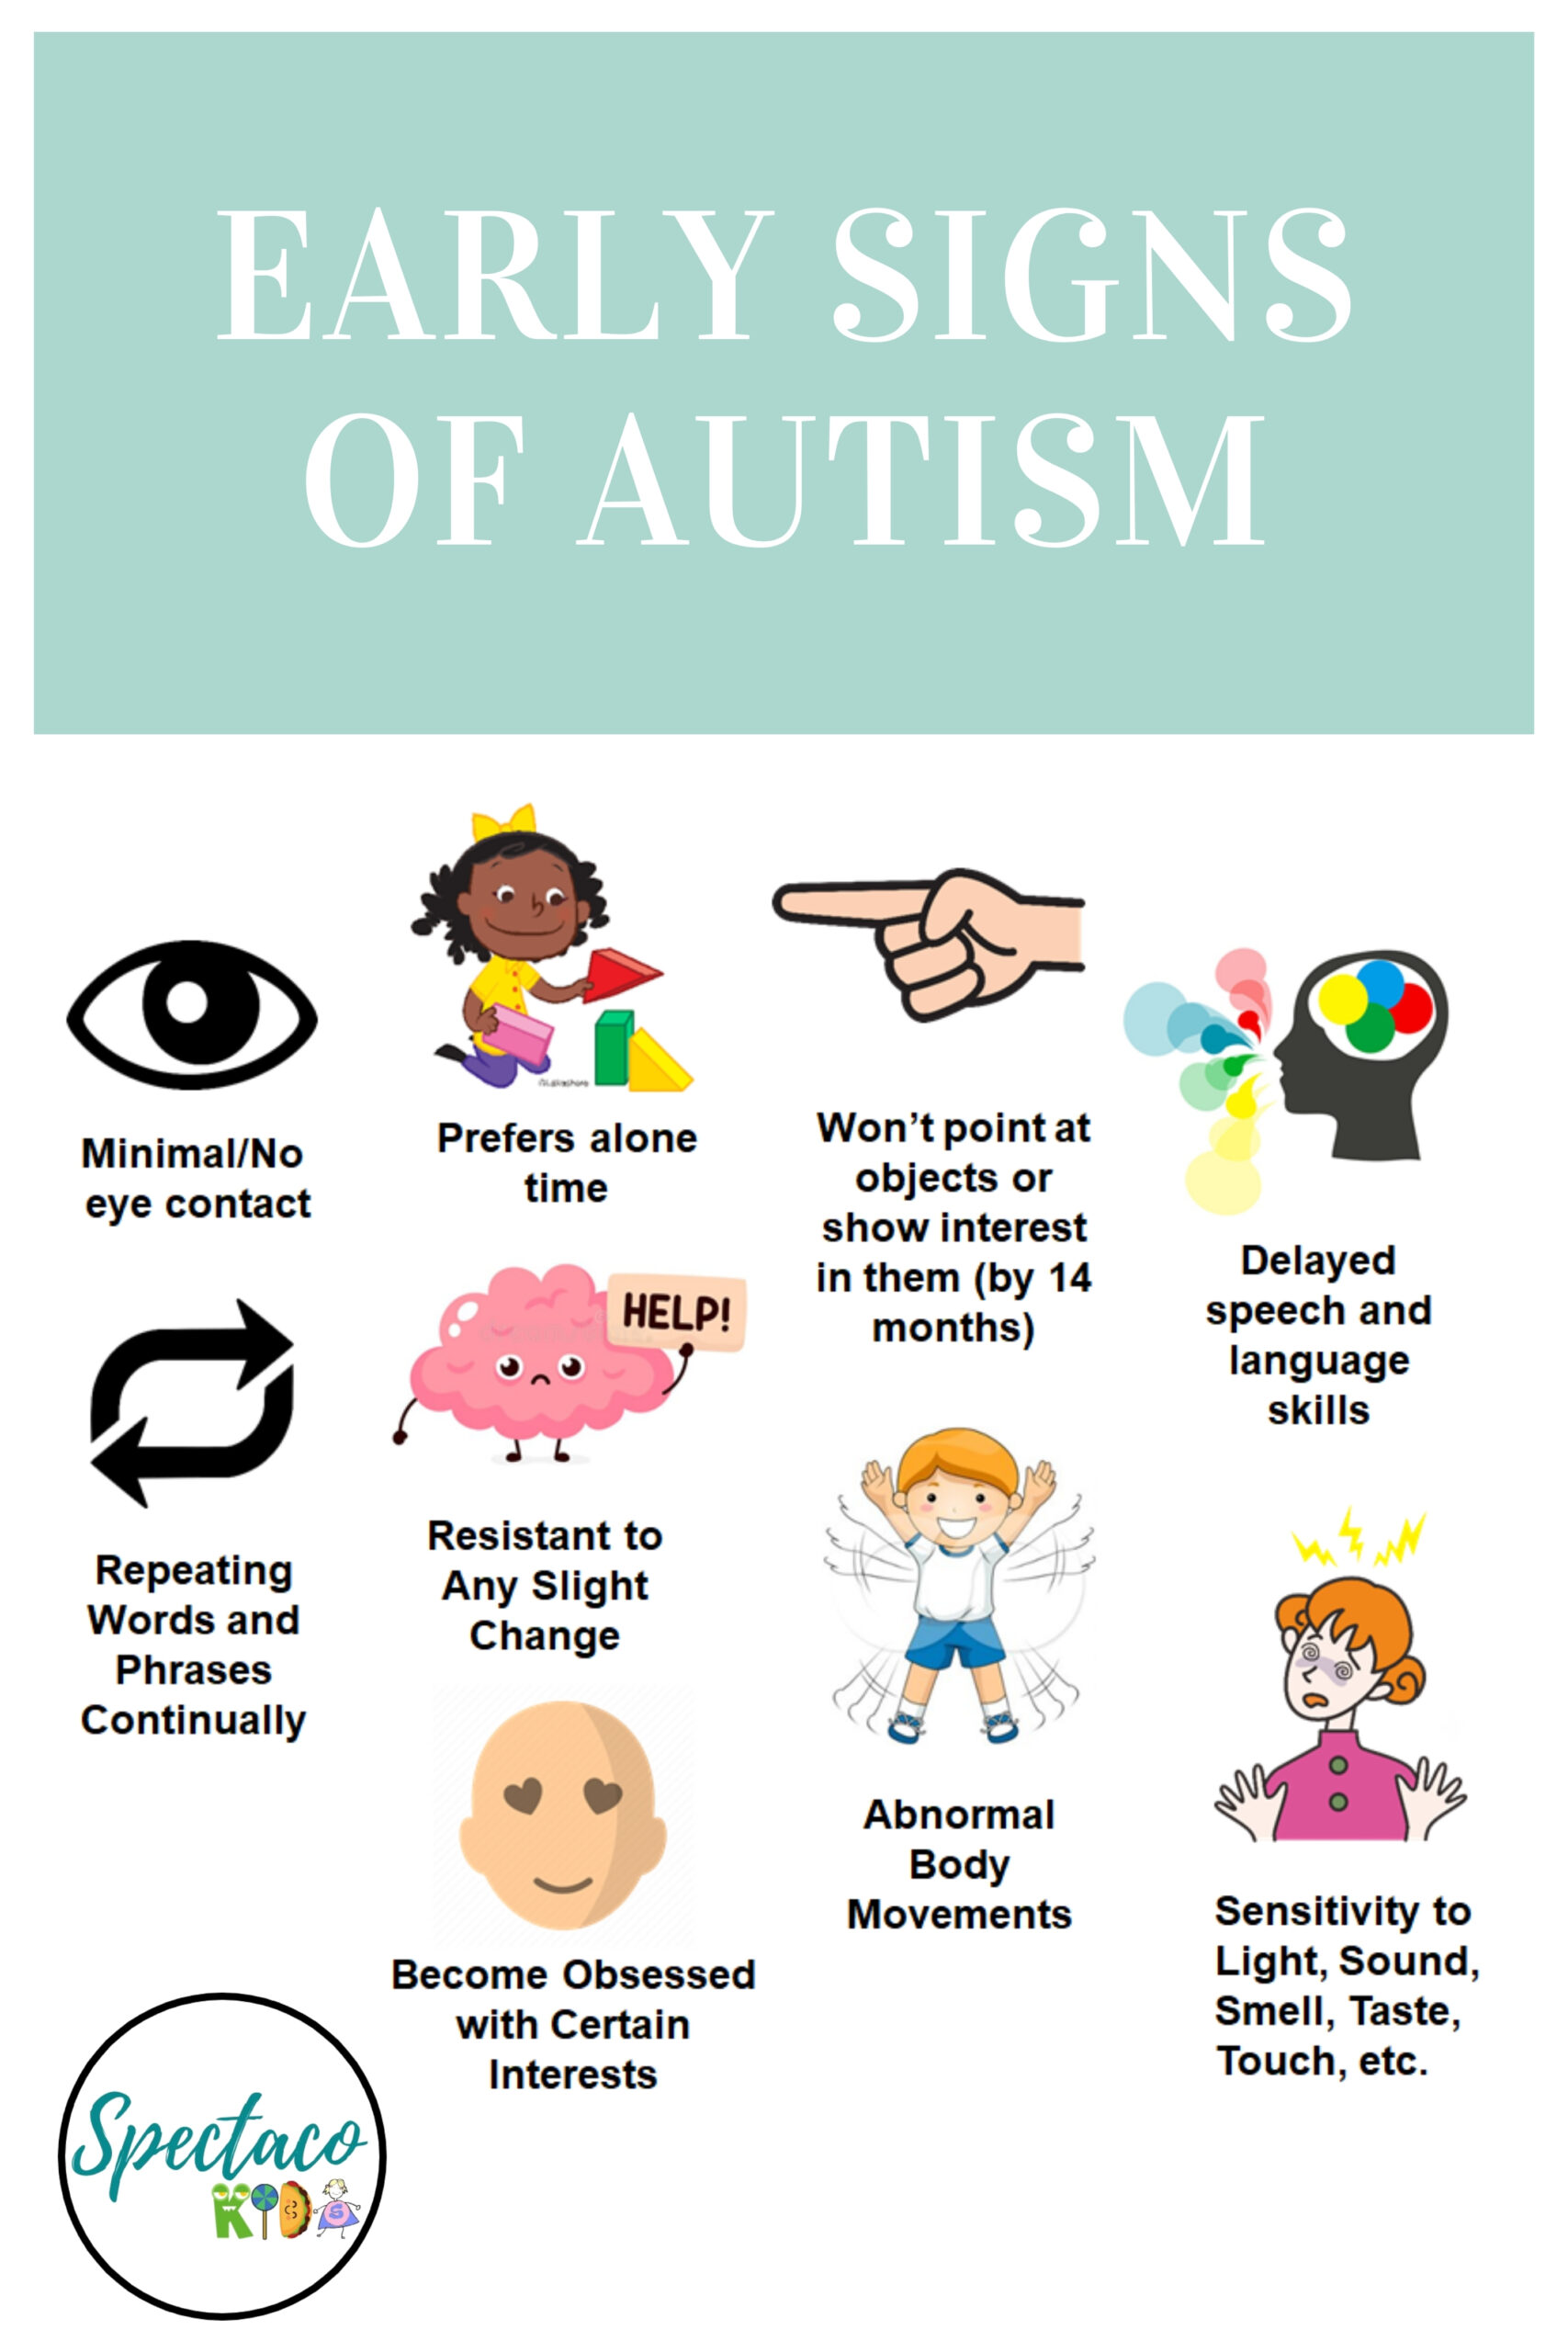 What are signs of autism in a child?